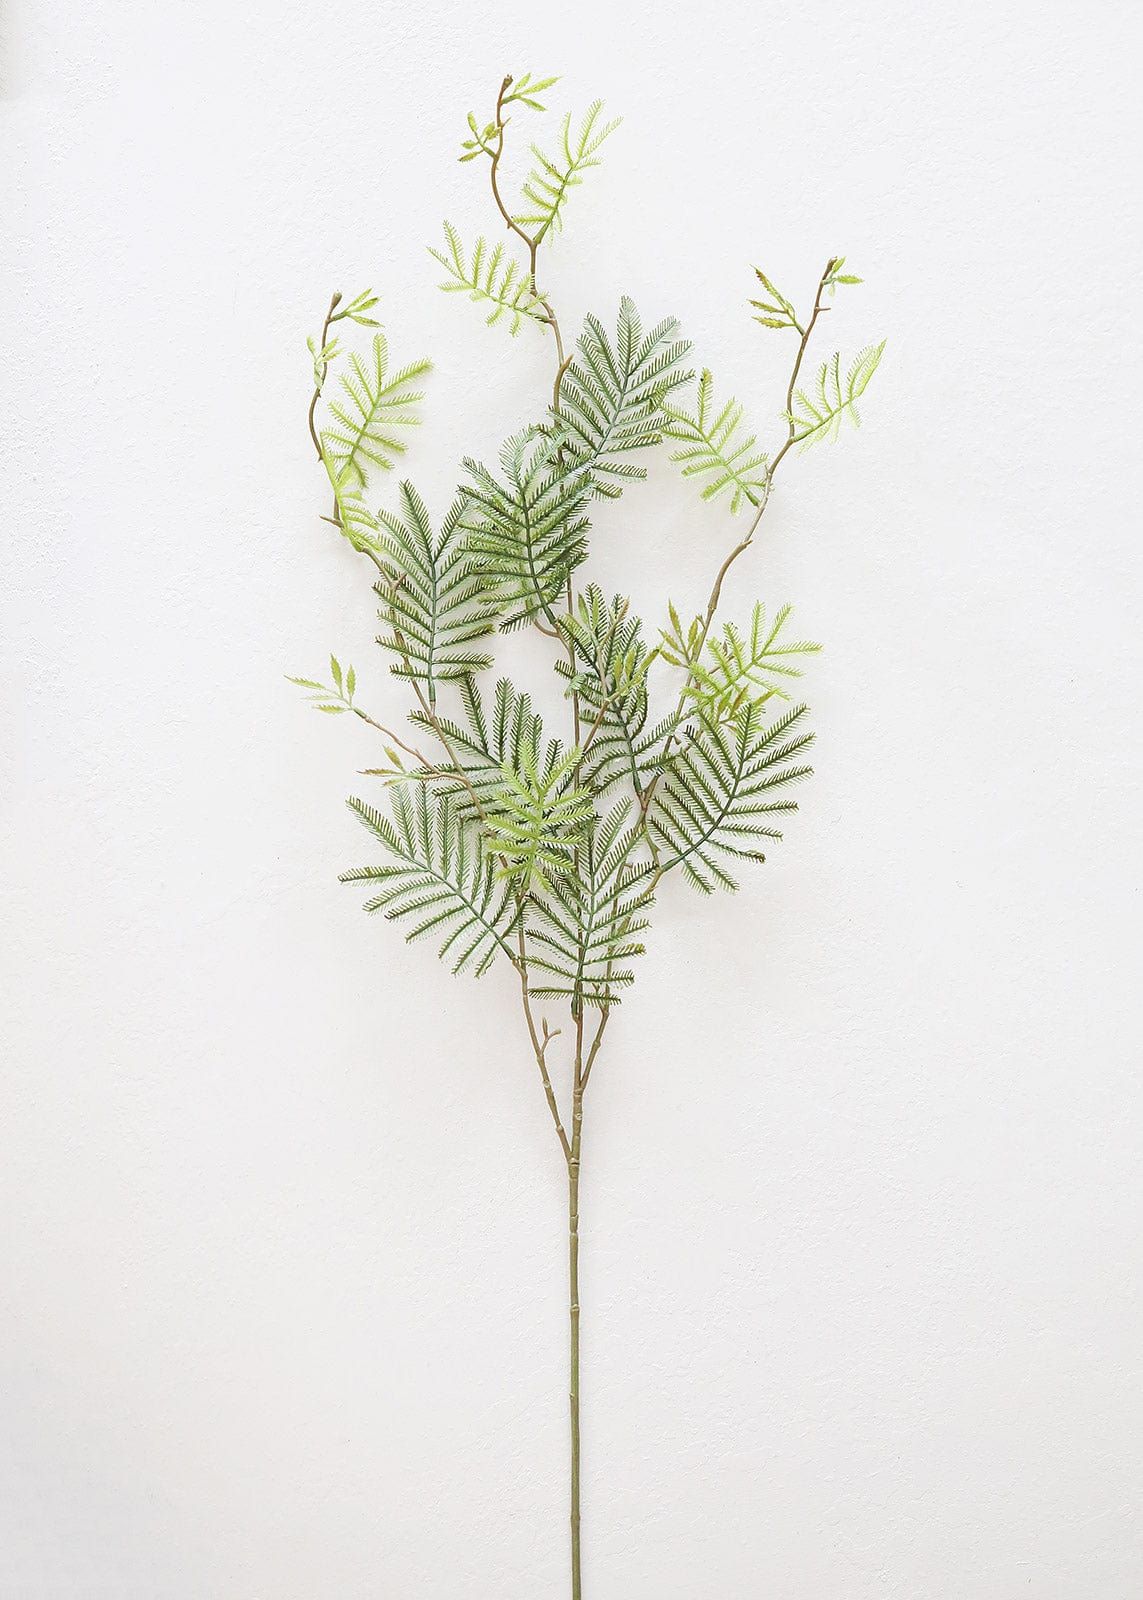 Green Mimosa Leaf Branch | Artificial Tropical Leaves at Afloral.com | Afloral